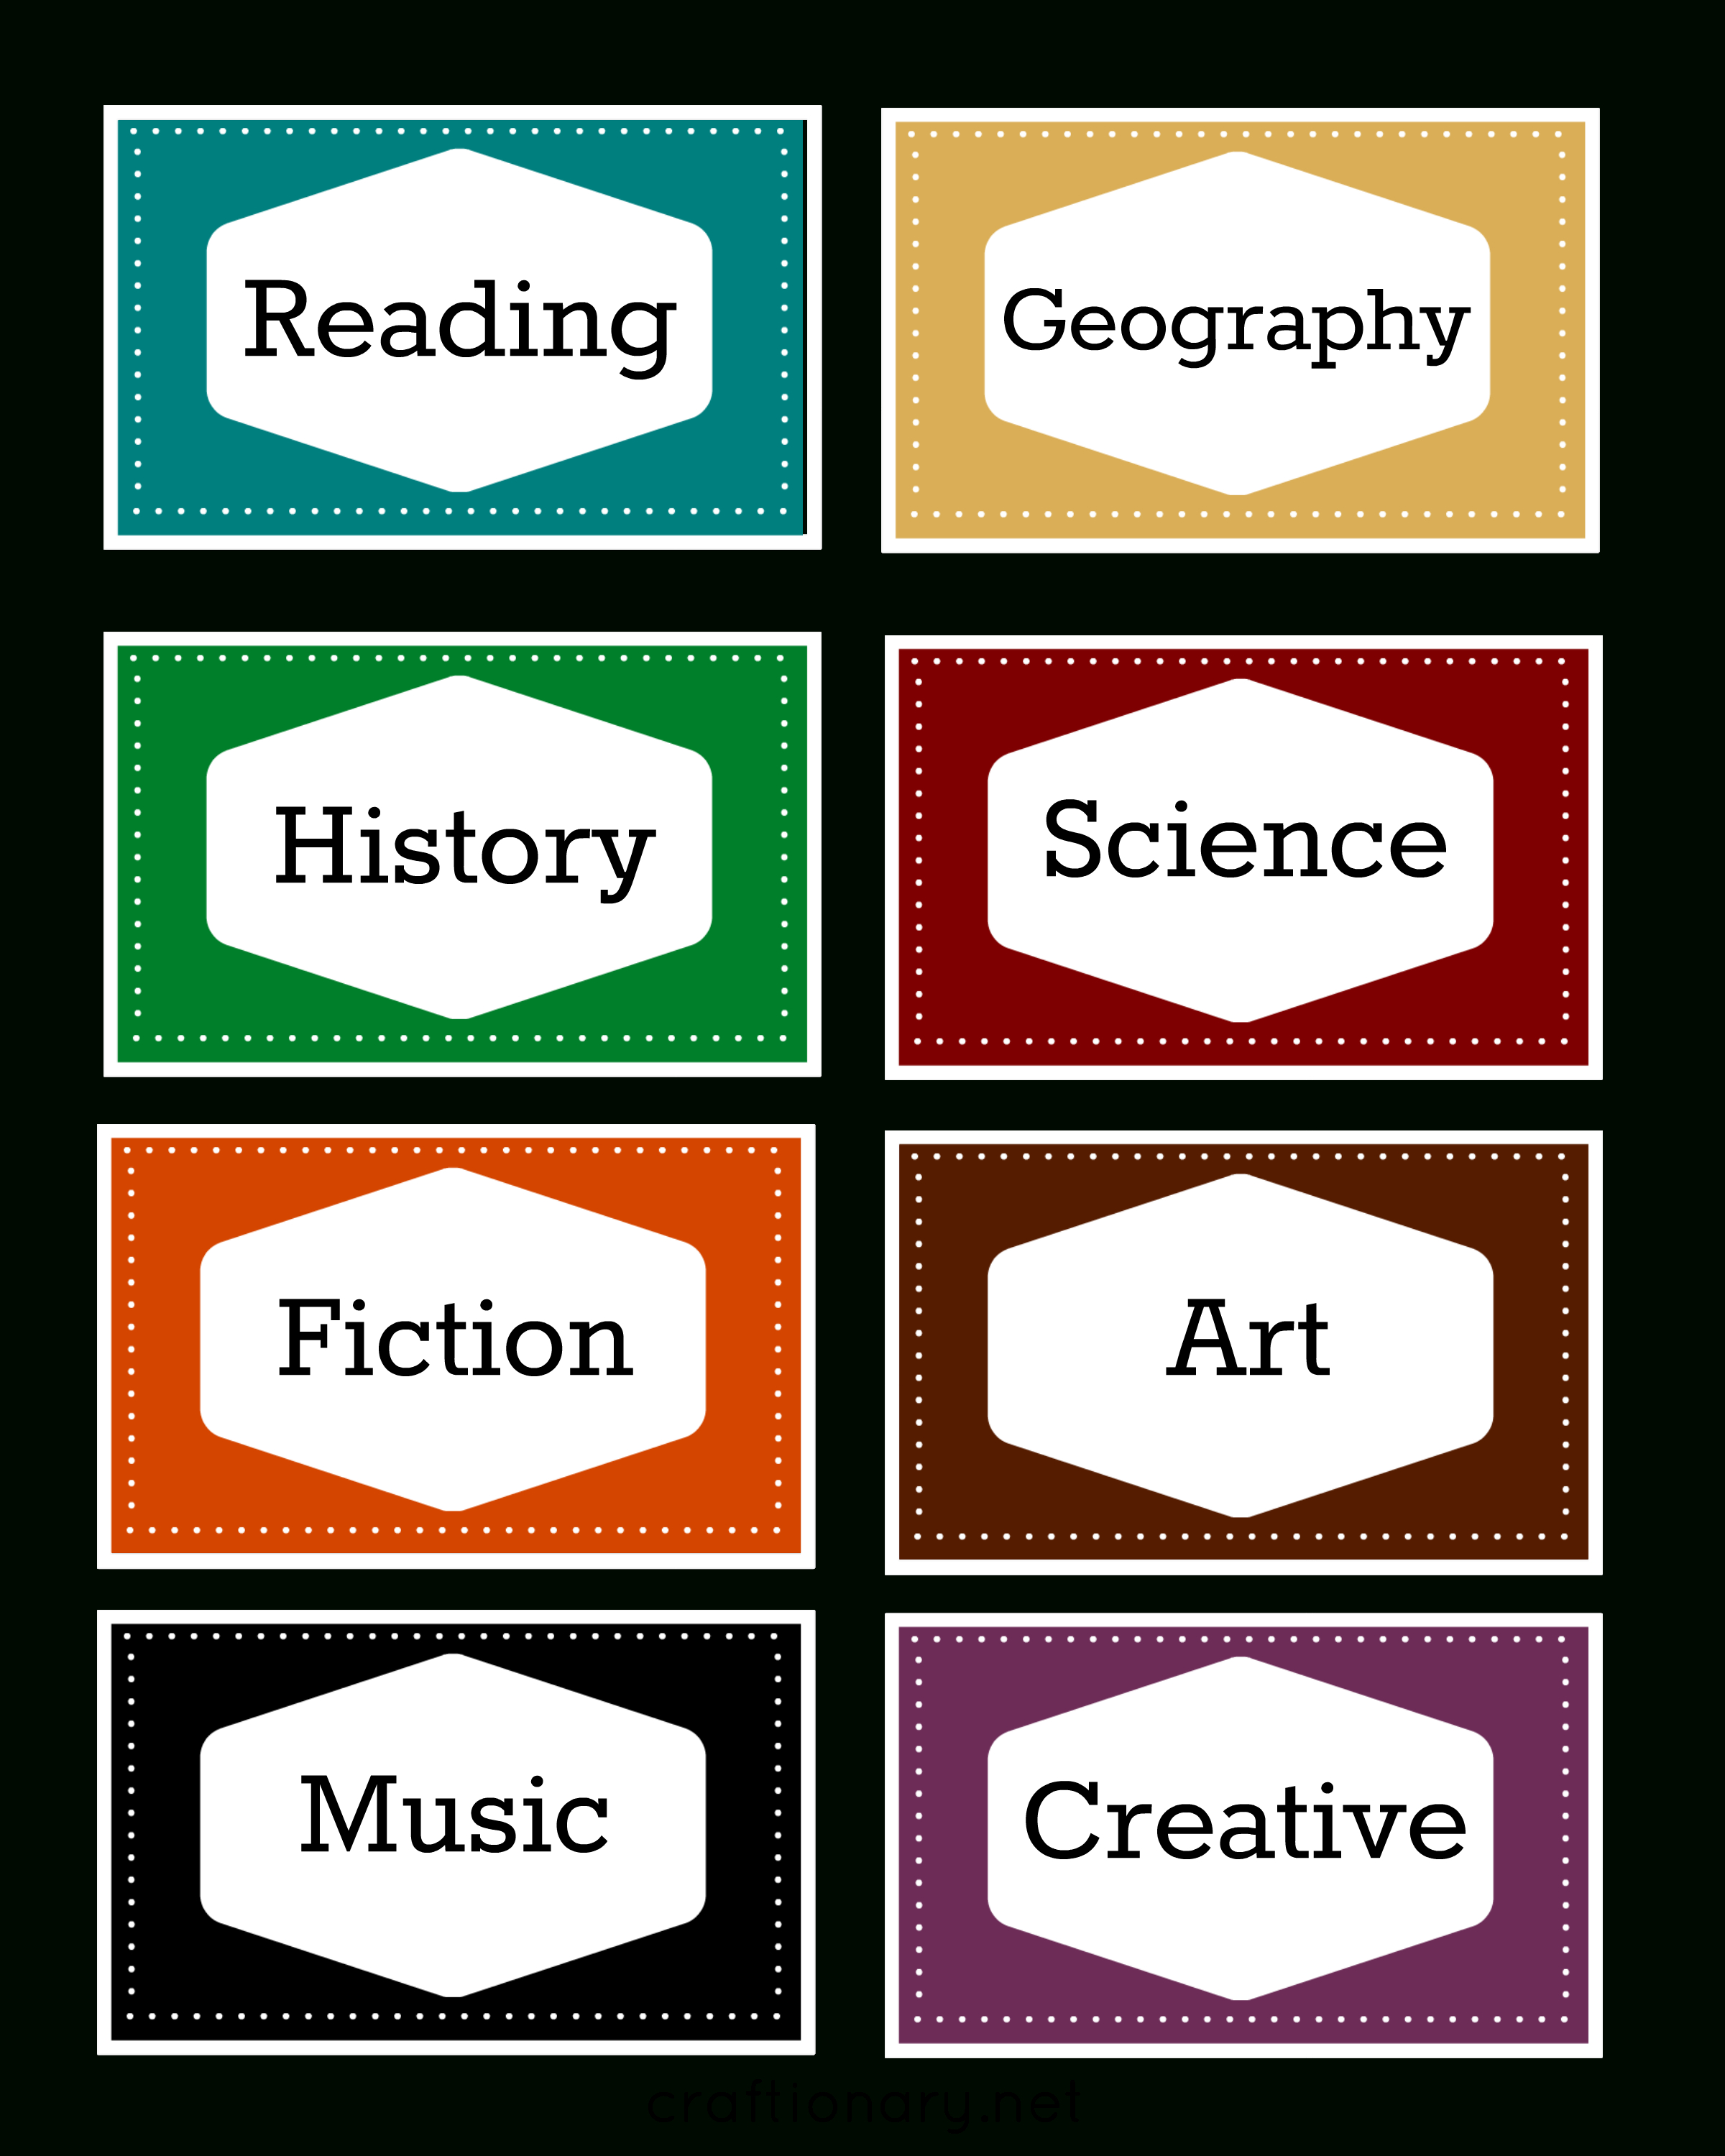 organize-your-classroom-library-free-genre-bin-labels-free